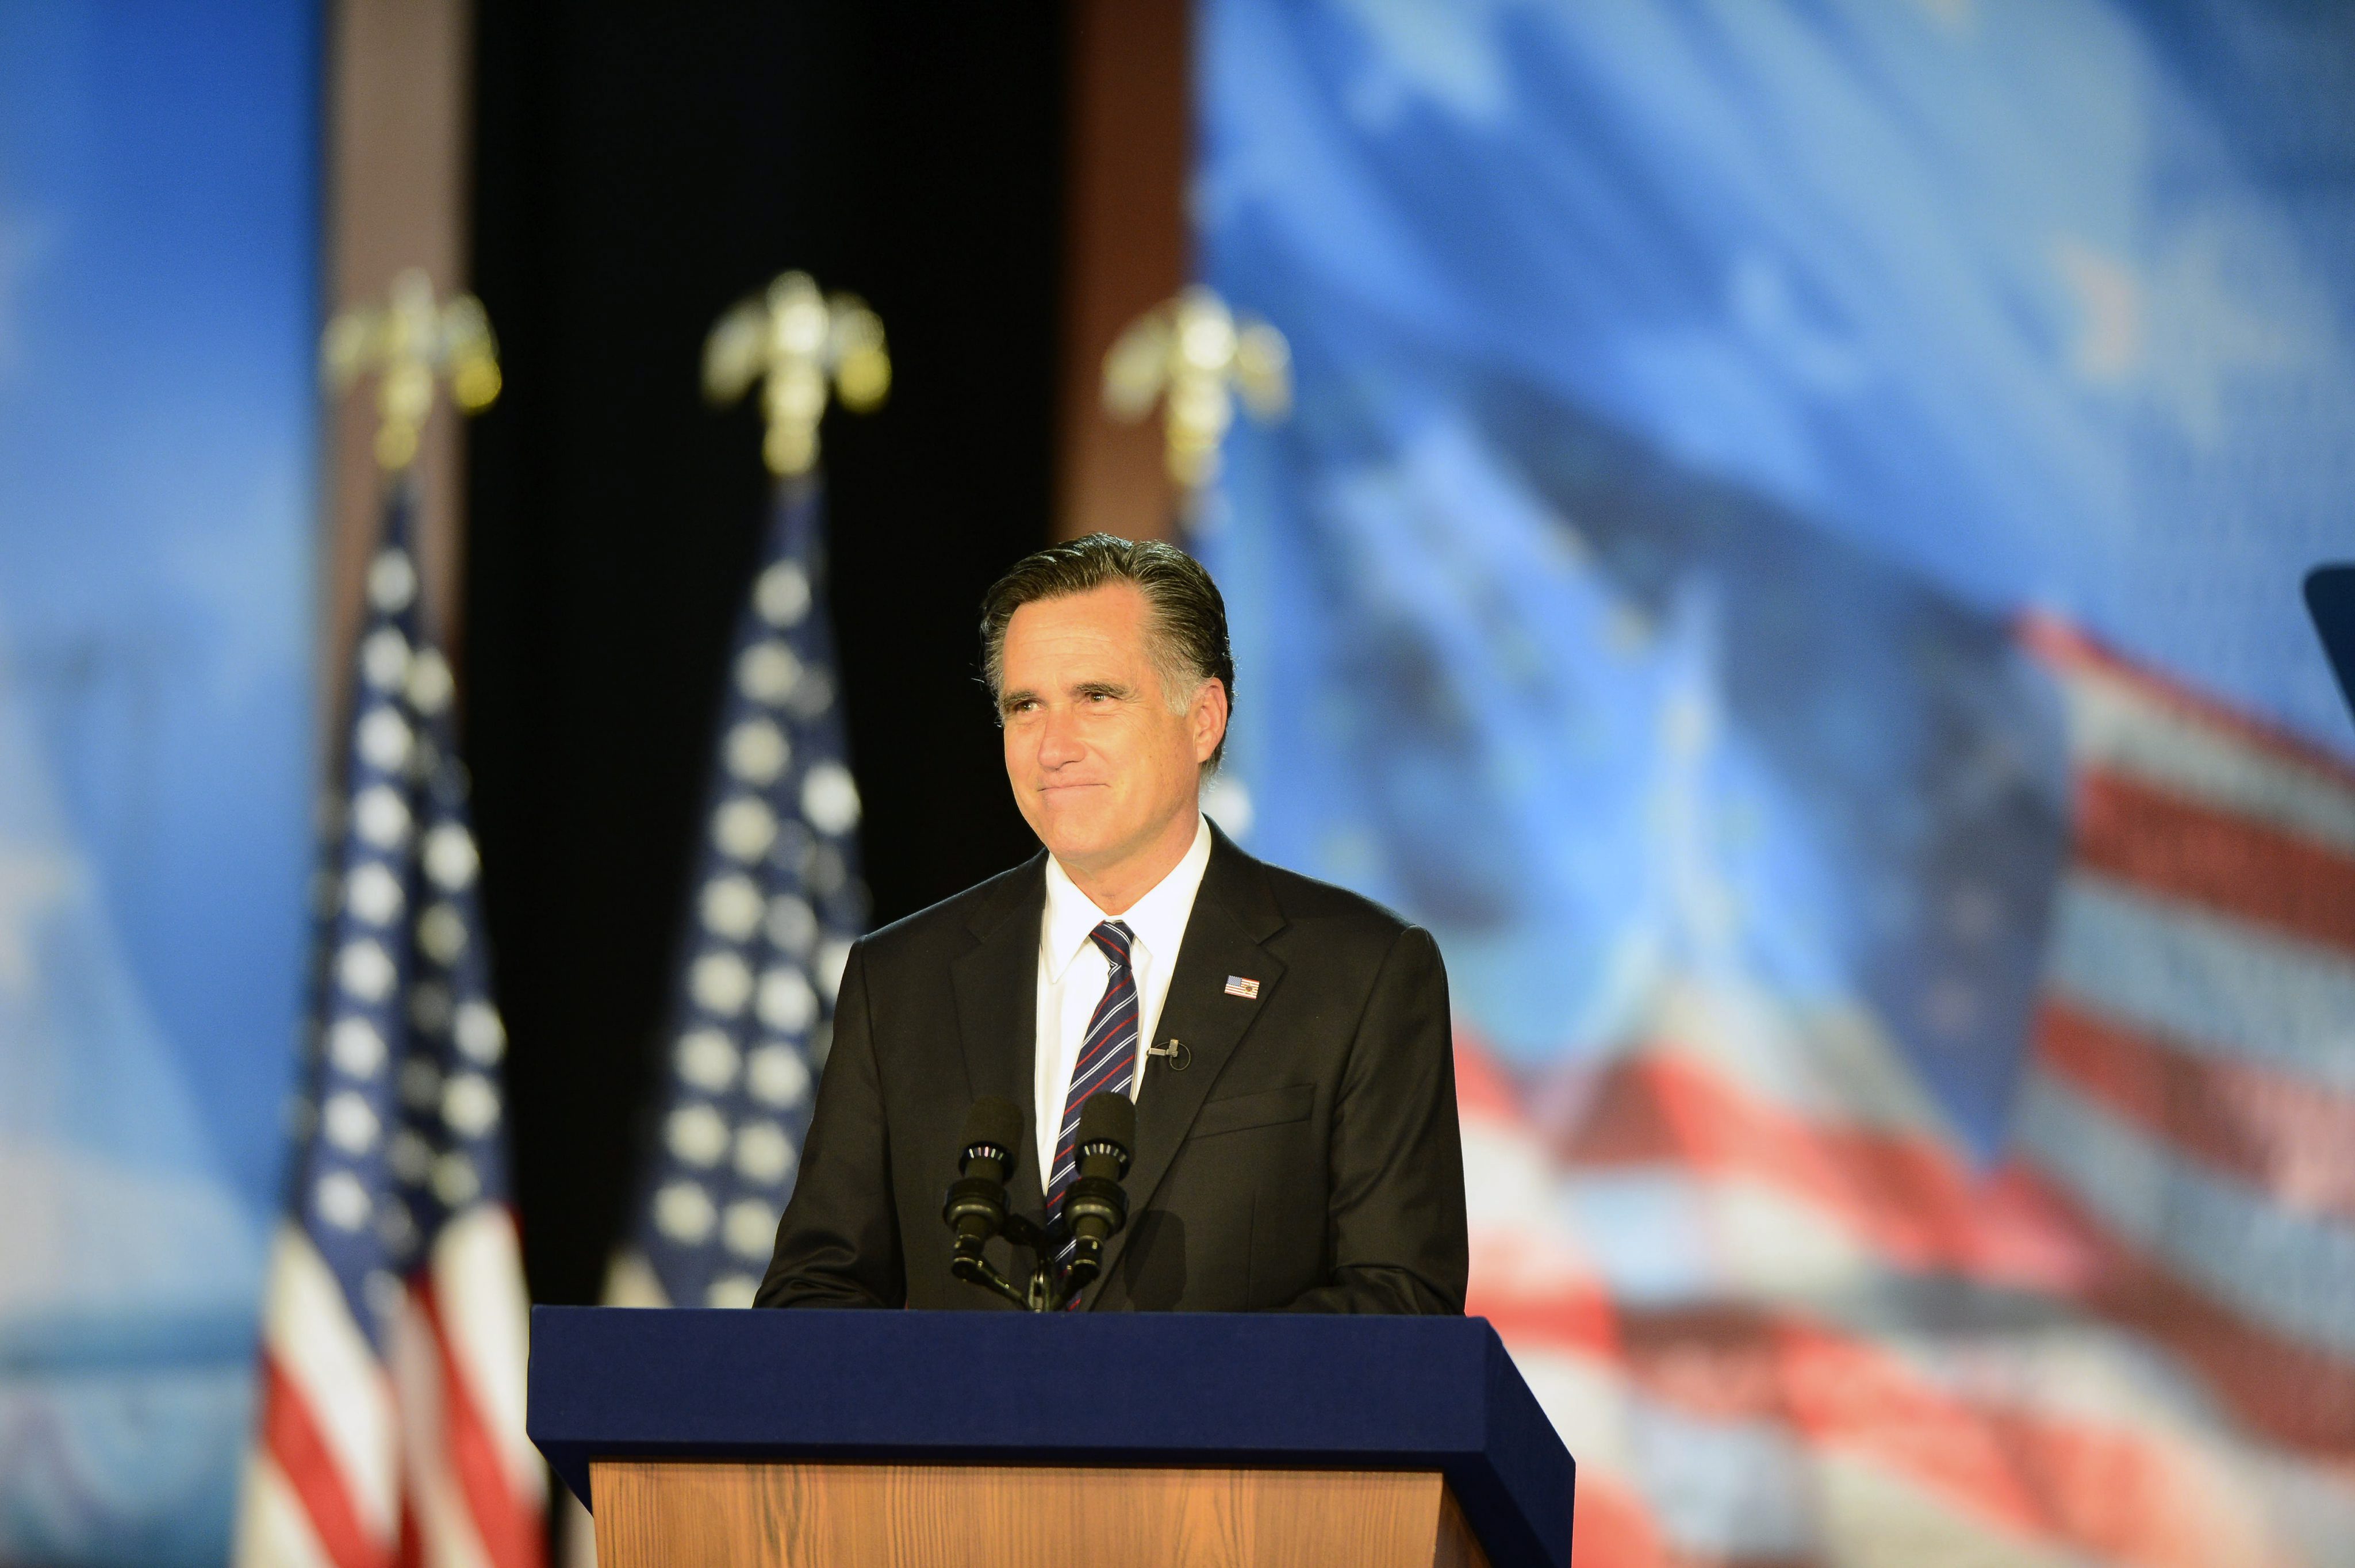 A spin-off from the word omnishambles is Romneyshambles, a derisive term used by the British press after US presidential candidate Mitt Romney expressed doubts about London’s ability to host a successful Olympics. Photo: EPA